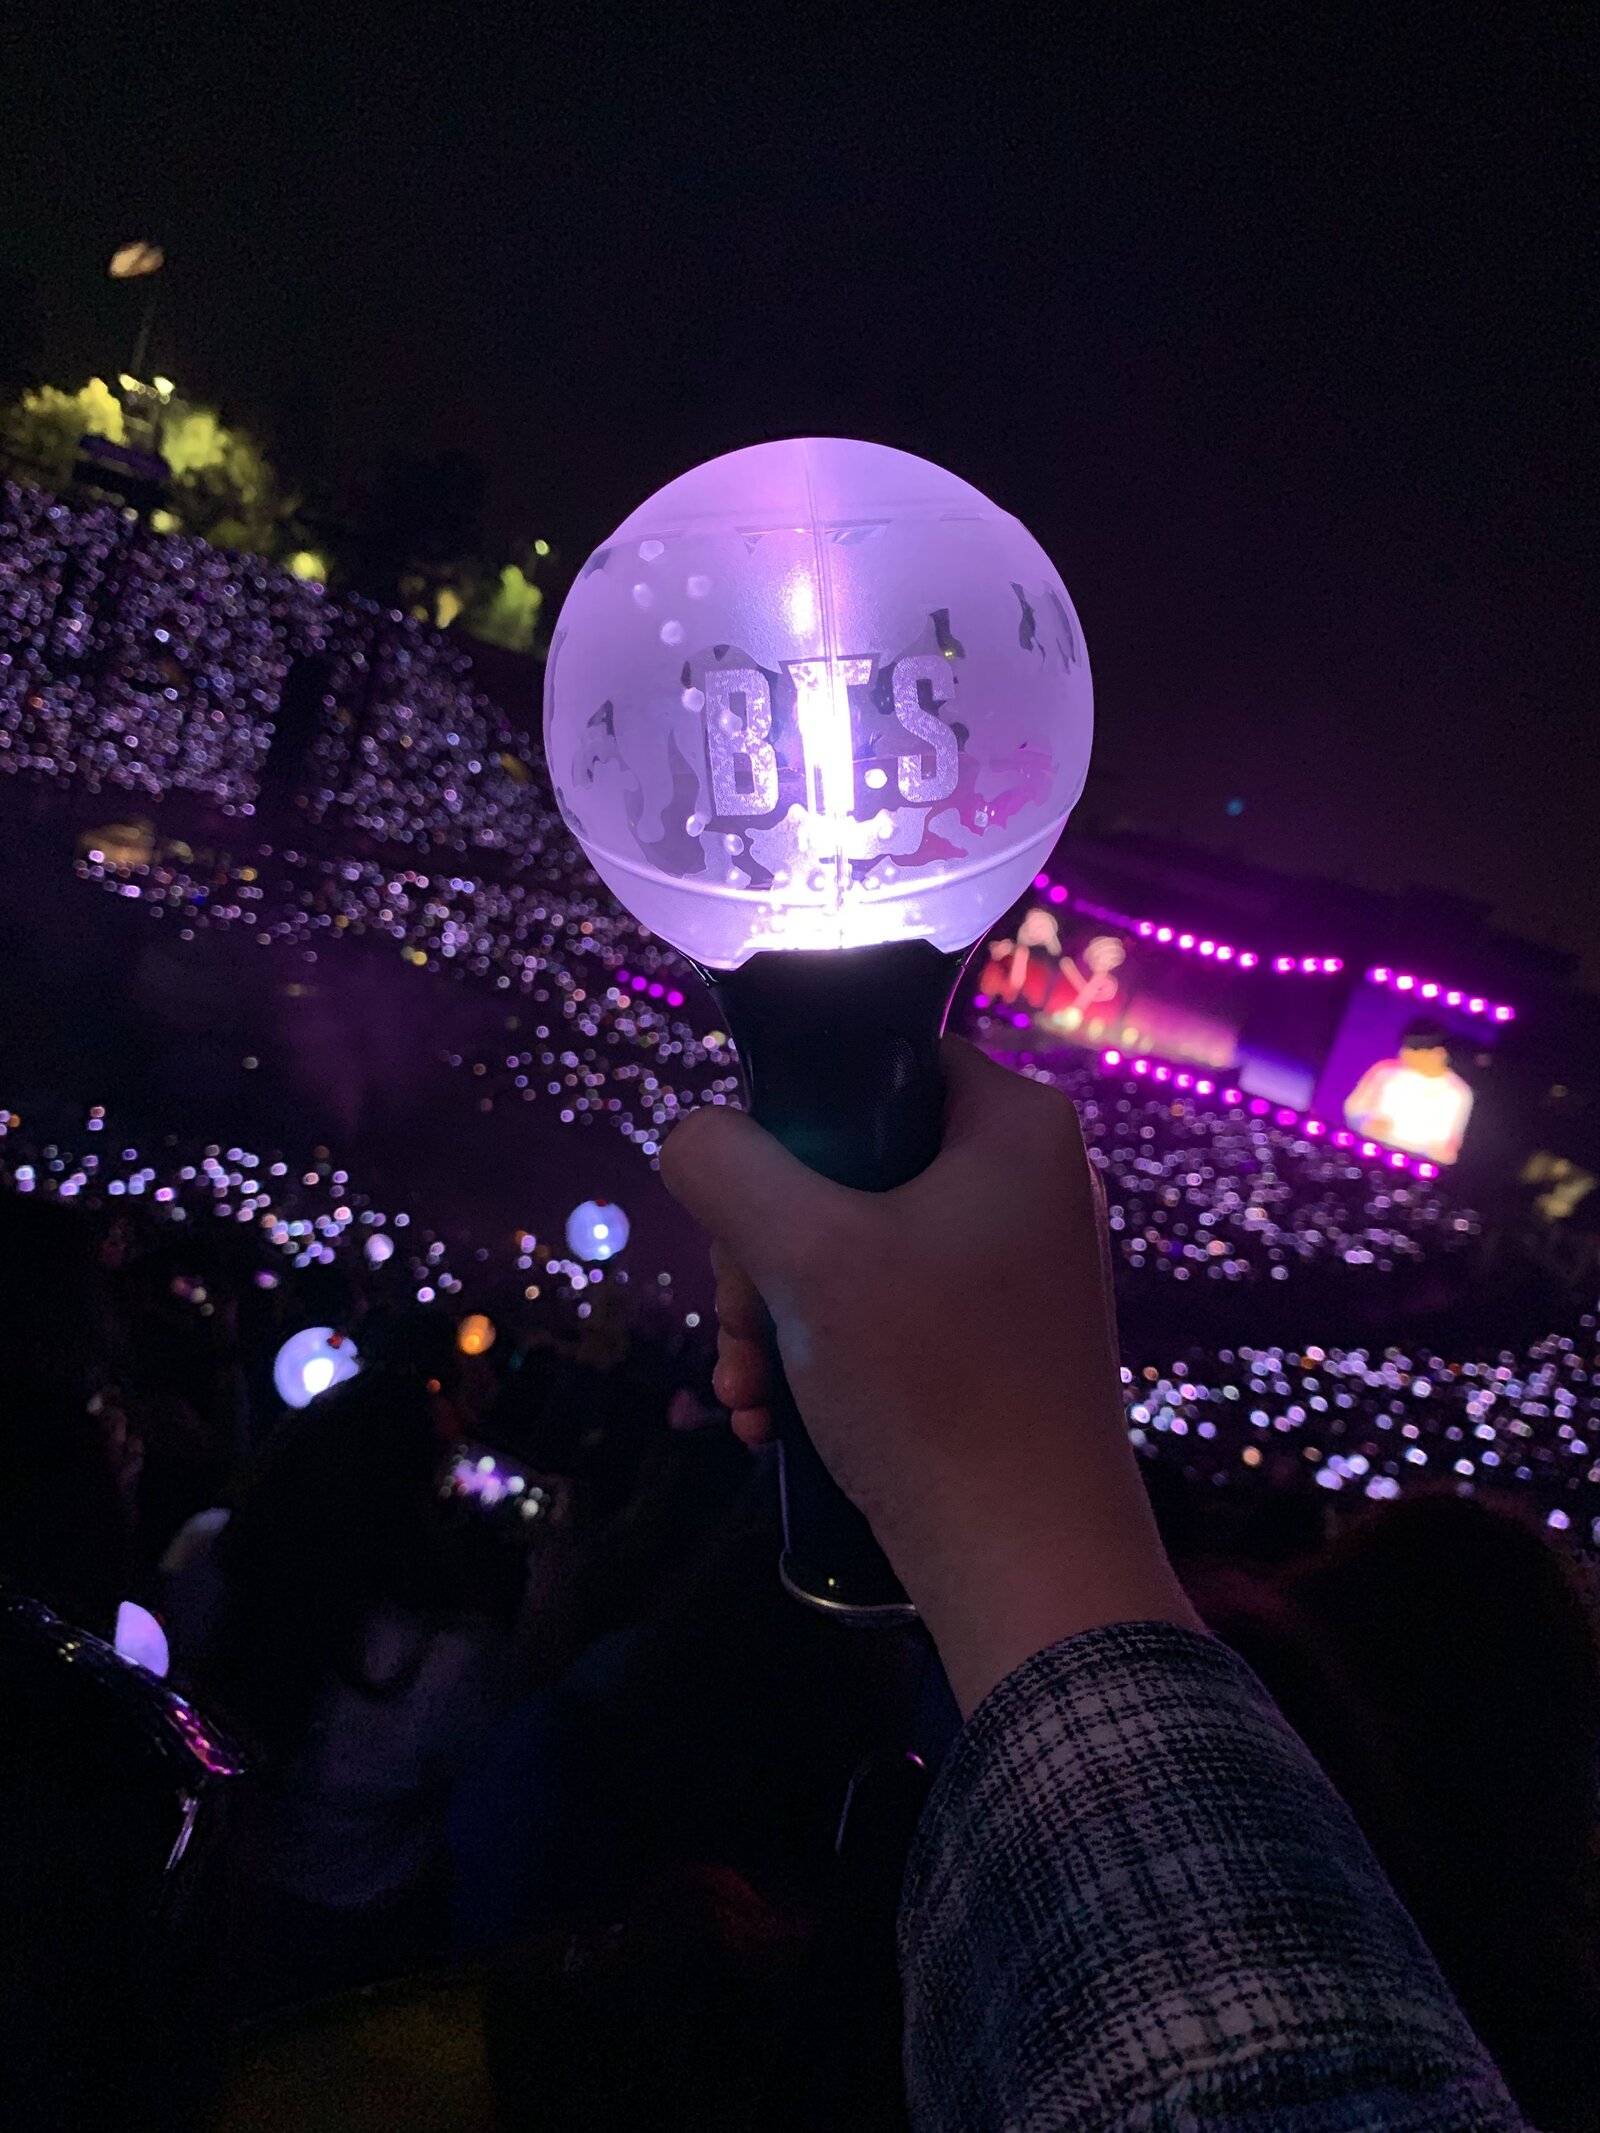 WTF is a BTS  ARMY  Bomb  Inside the exclusive band 